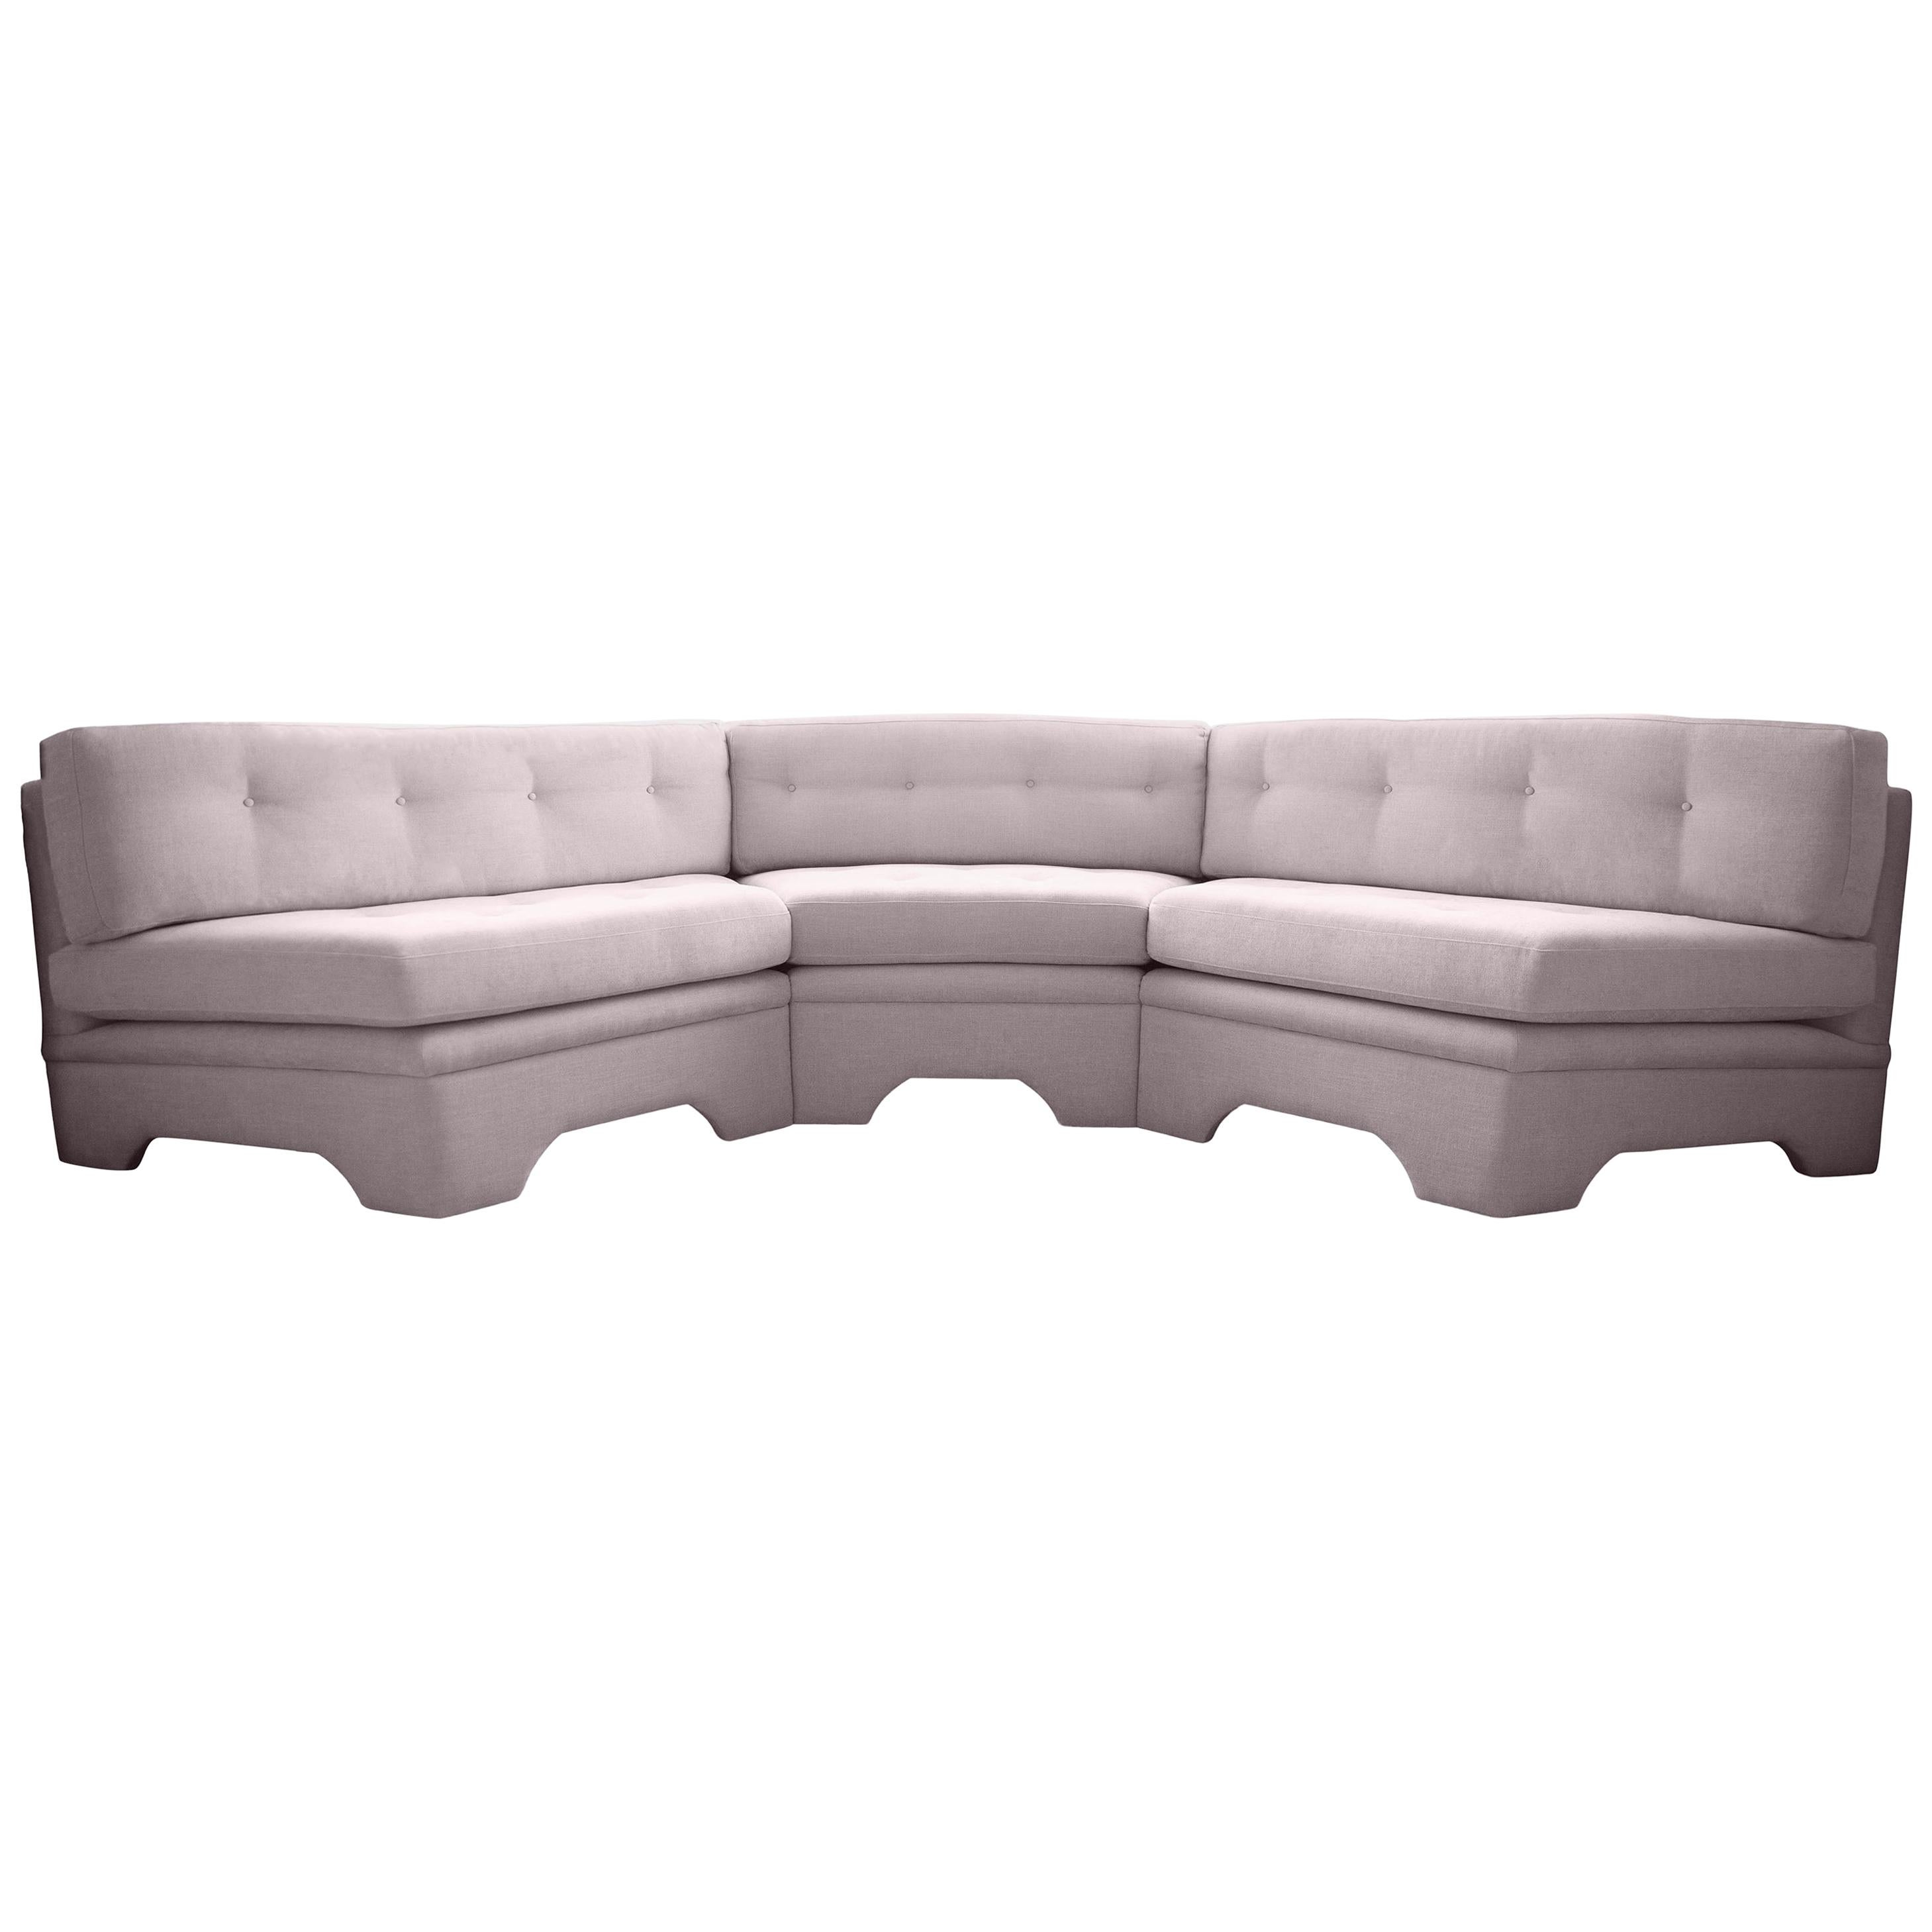 Handcrafted Upholstered Dining Banquette Curved Gathering Sectional Sofa For Sale